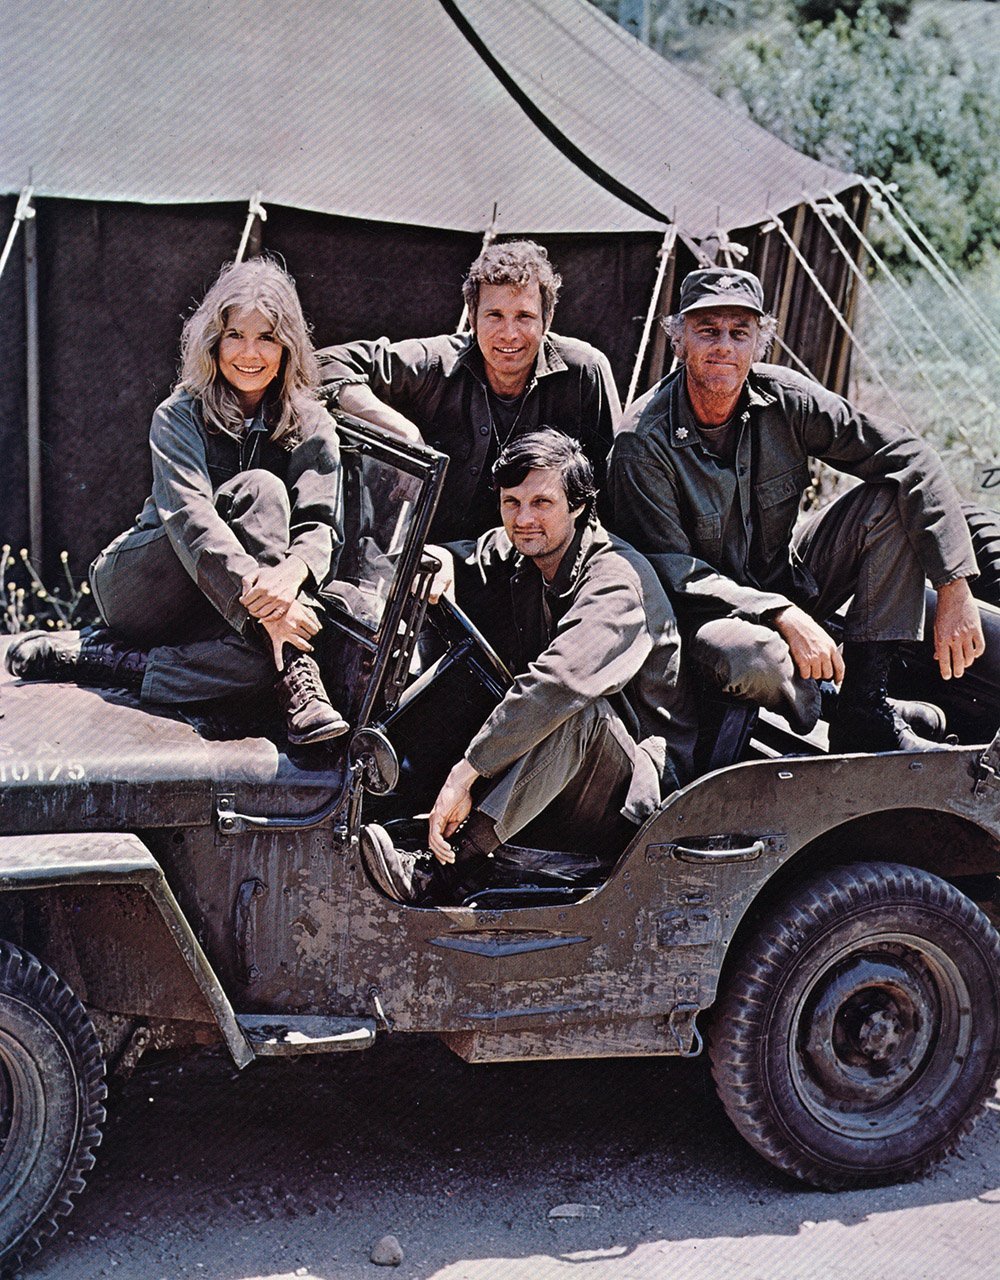 Alan Alda and the rest of the main cast of "M.A.S.H." I Image: Getty Images.